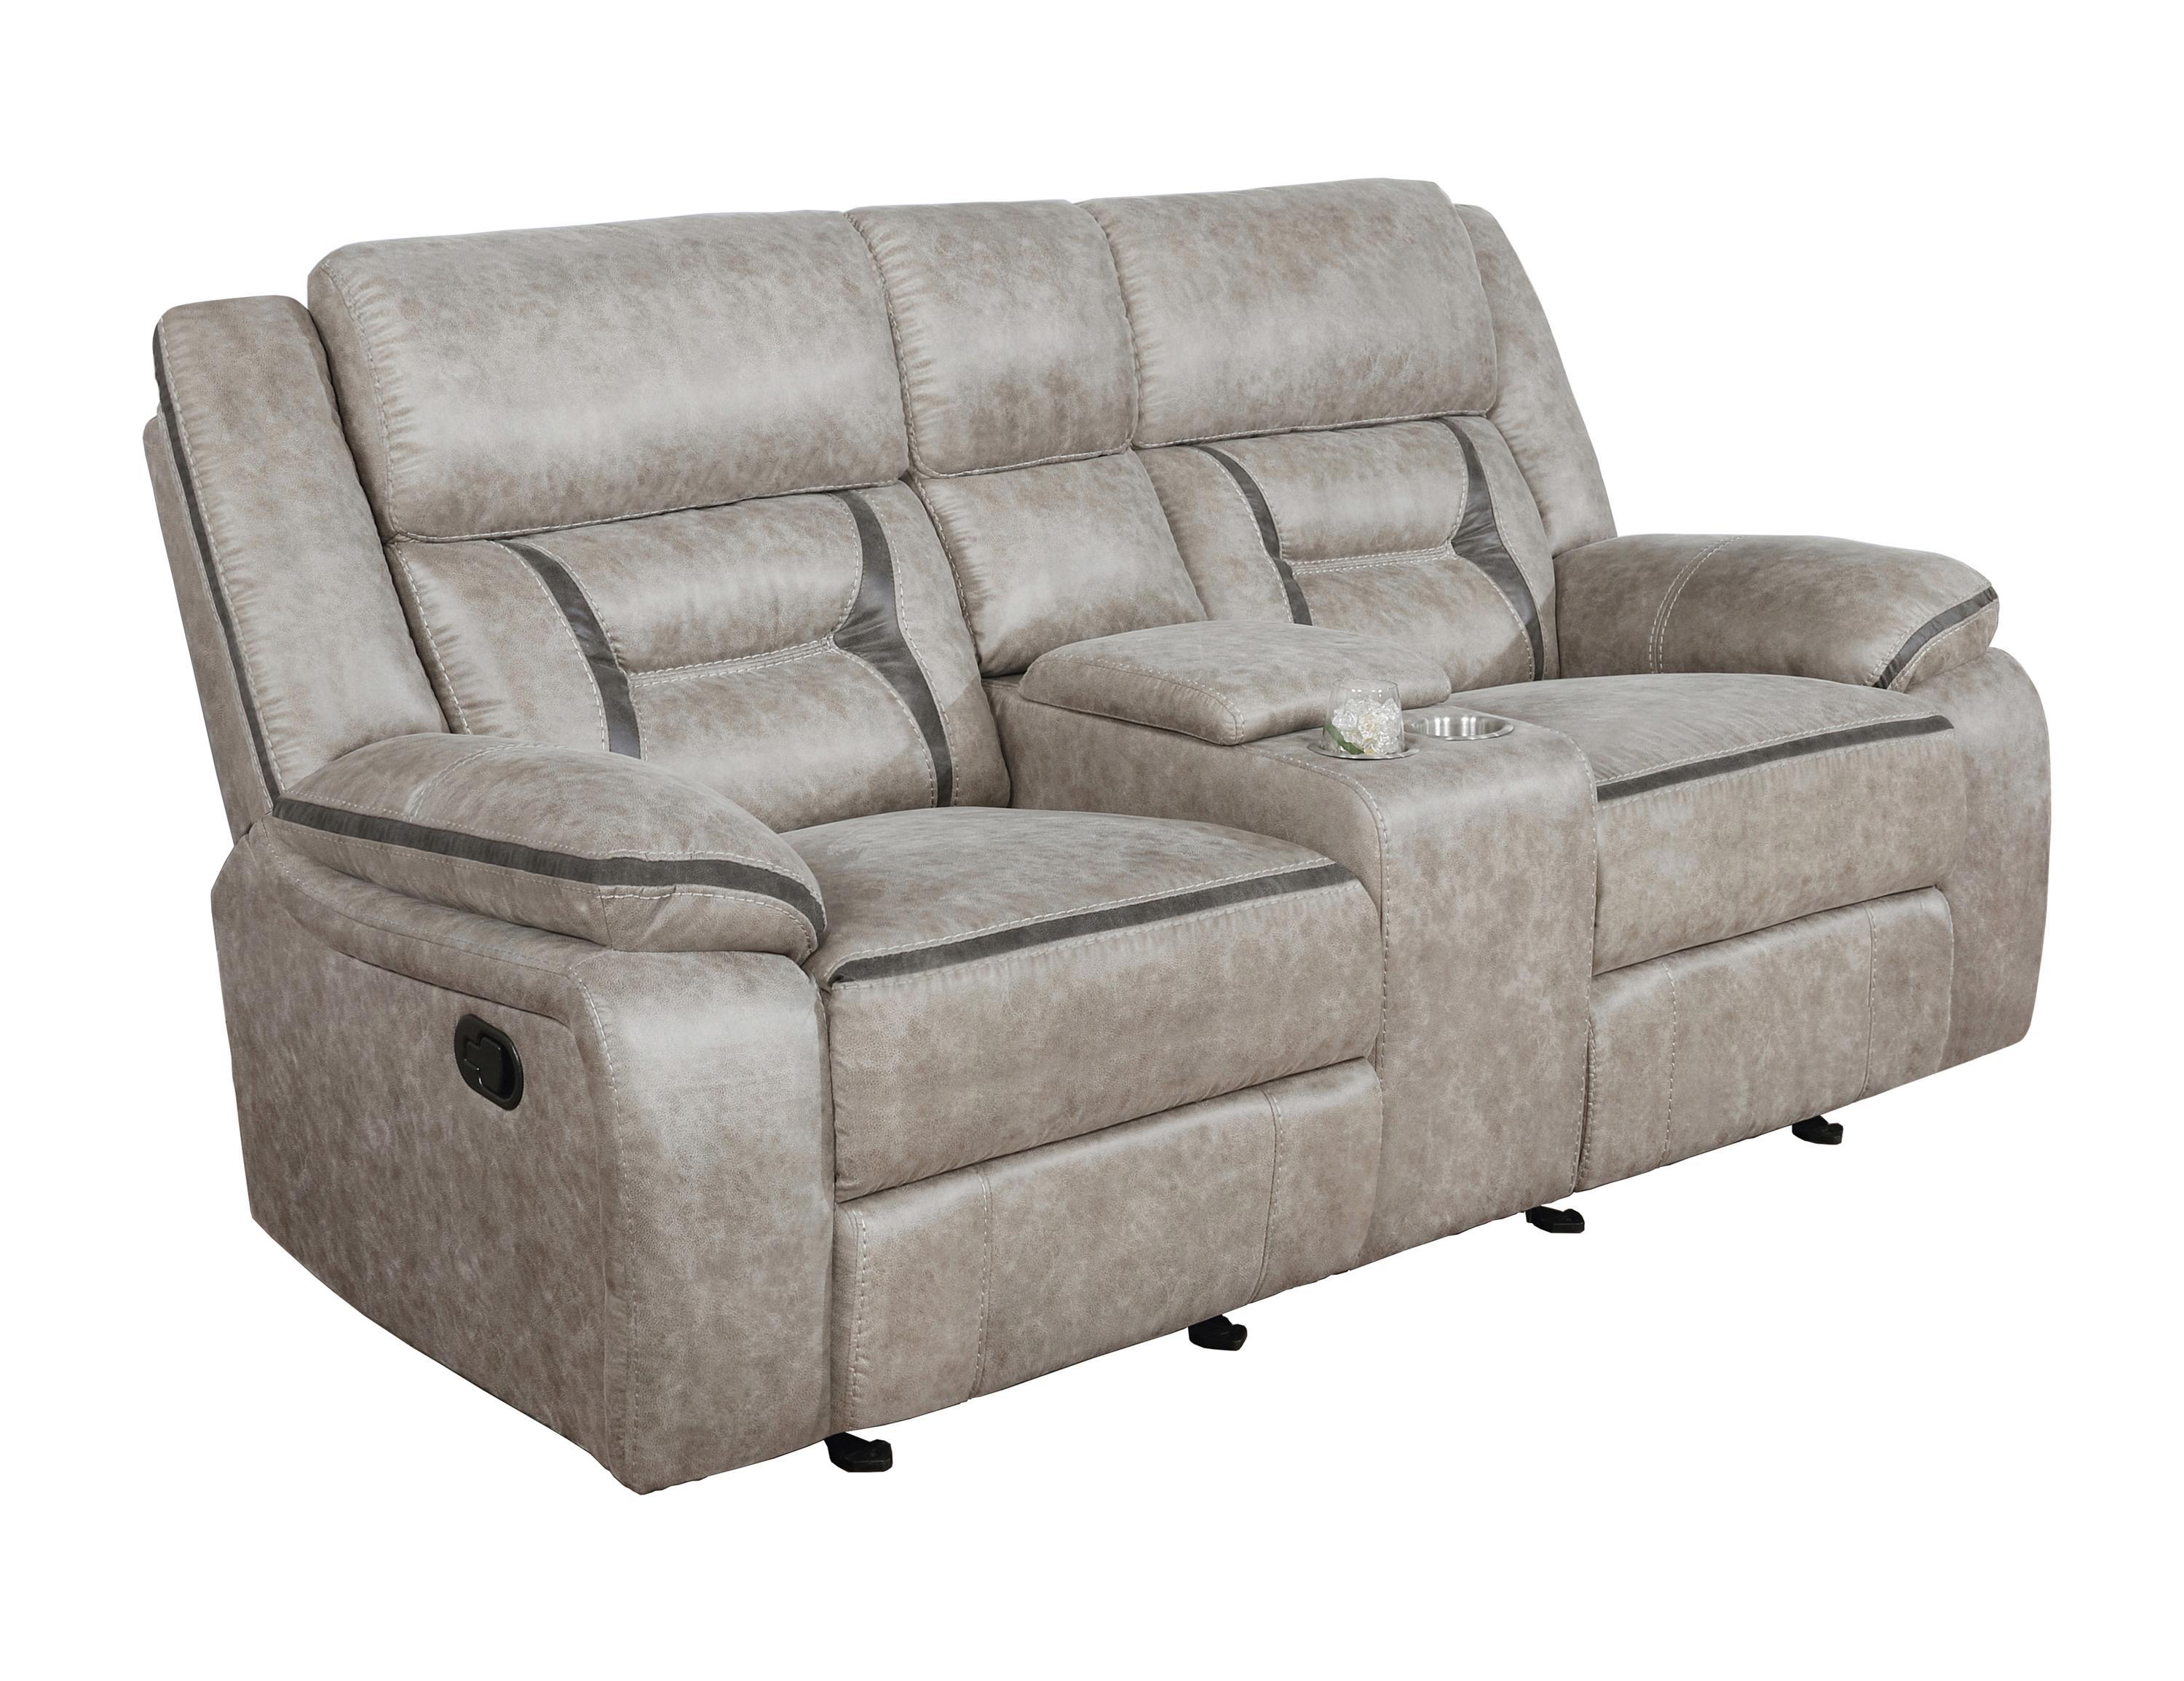 Transitional Glider loveseat 651352 Greer 651352 in Taupe Leatherette